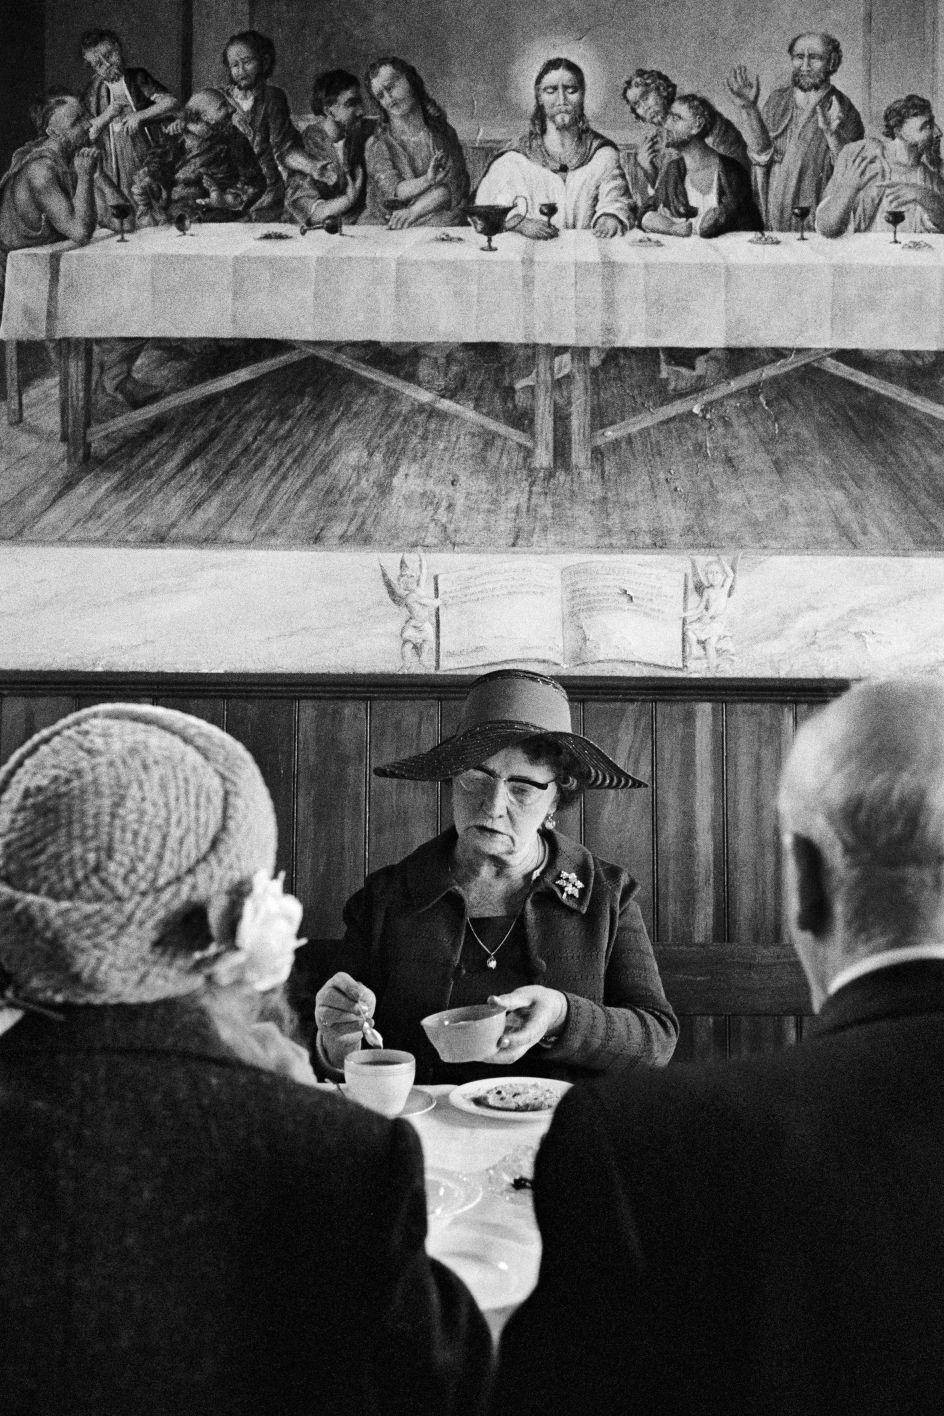 Steep Lane Baptist Chapel buffet lunch, Sowerby, Calderdale, West Yorkshire, England, UK, 1977 From 'The Non-Conformists' © Martin Parr / Magnum Photos / Rocket Gallery